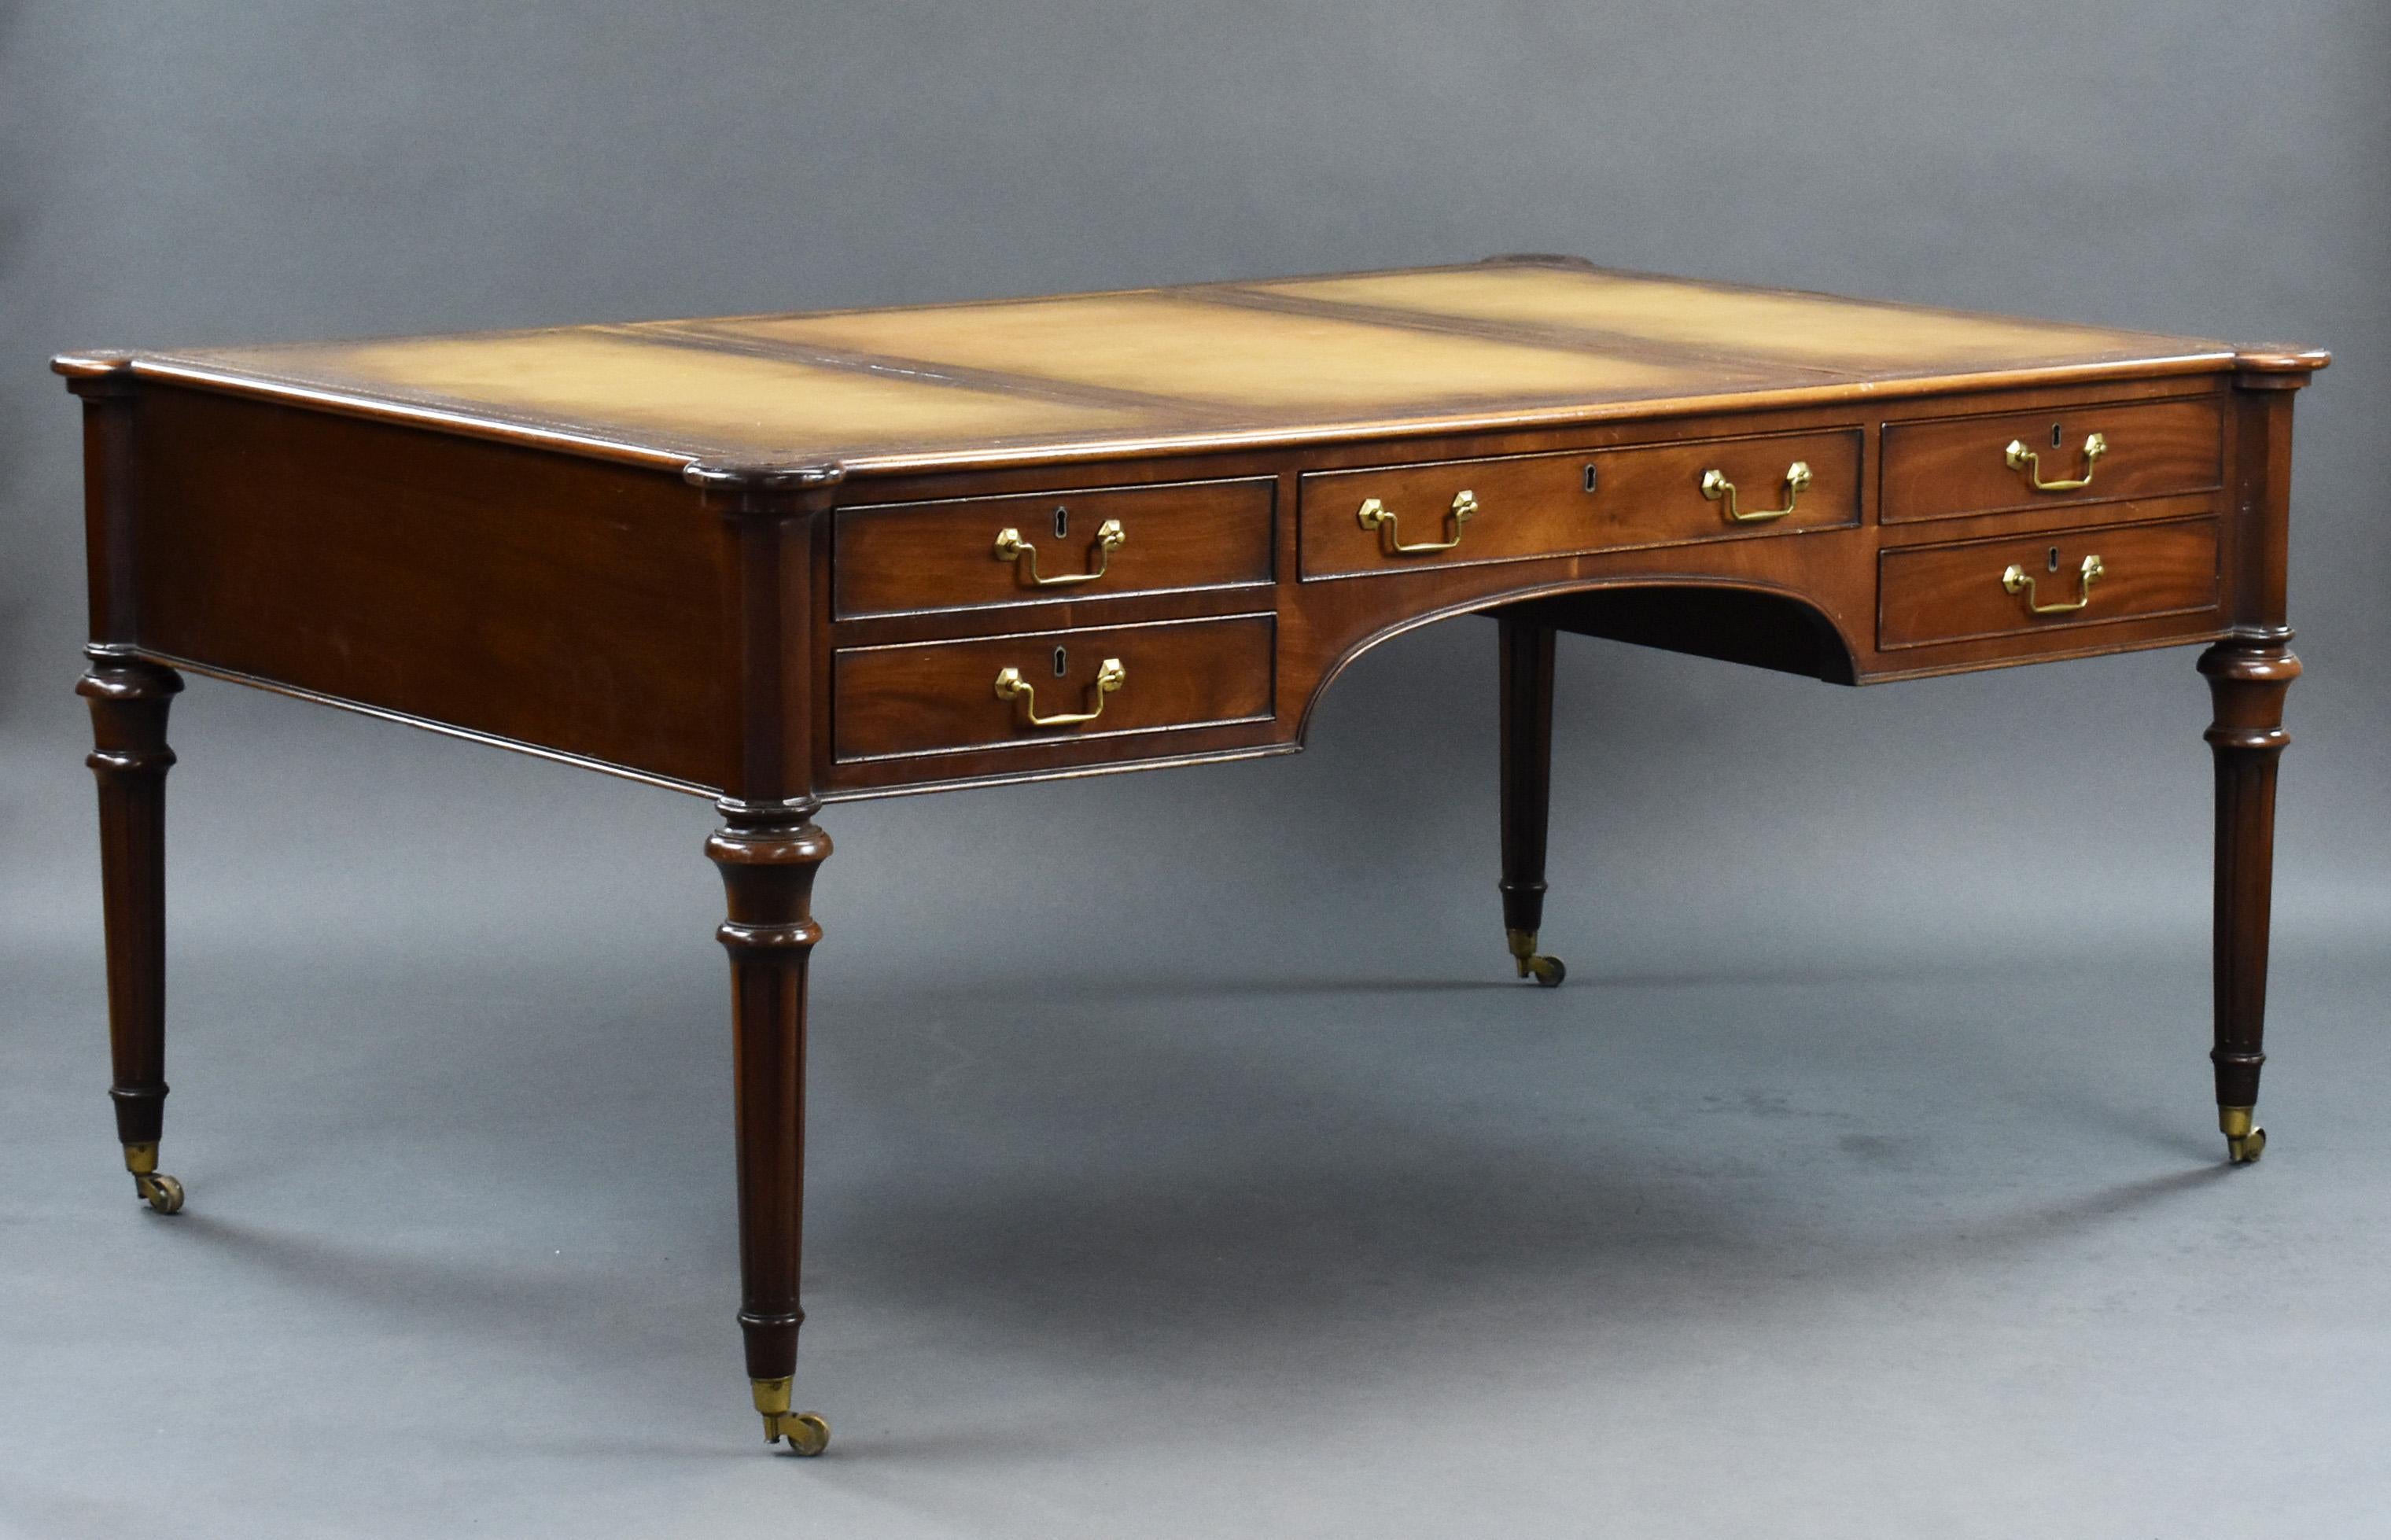 For sale is a good quality large leather top writing table by Taylor & Sons, Brompton Road, London, having three leather inserts each decorated with Greek key tooling, above an arrangement of five drawers with a further five drawers on the opposing